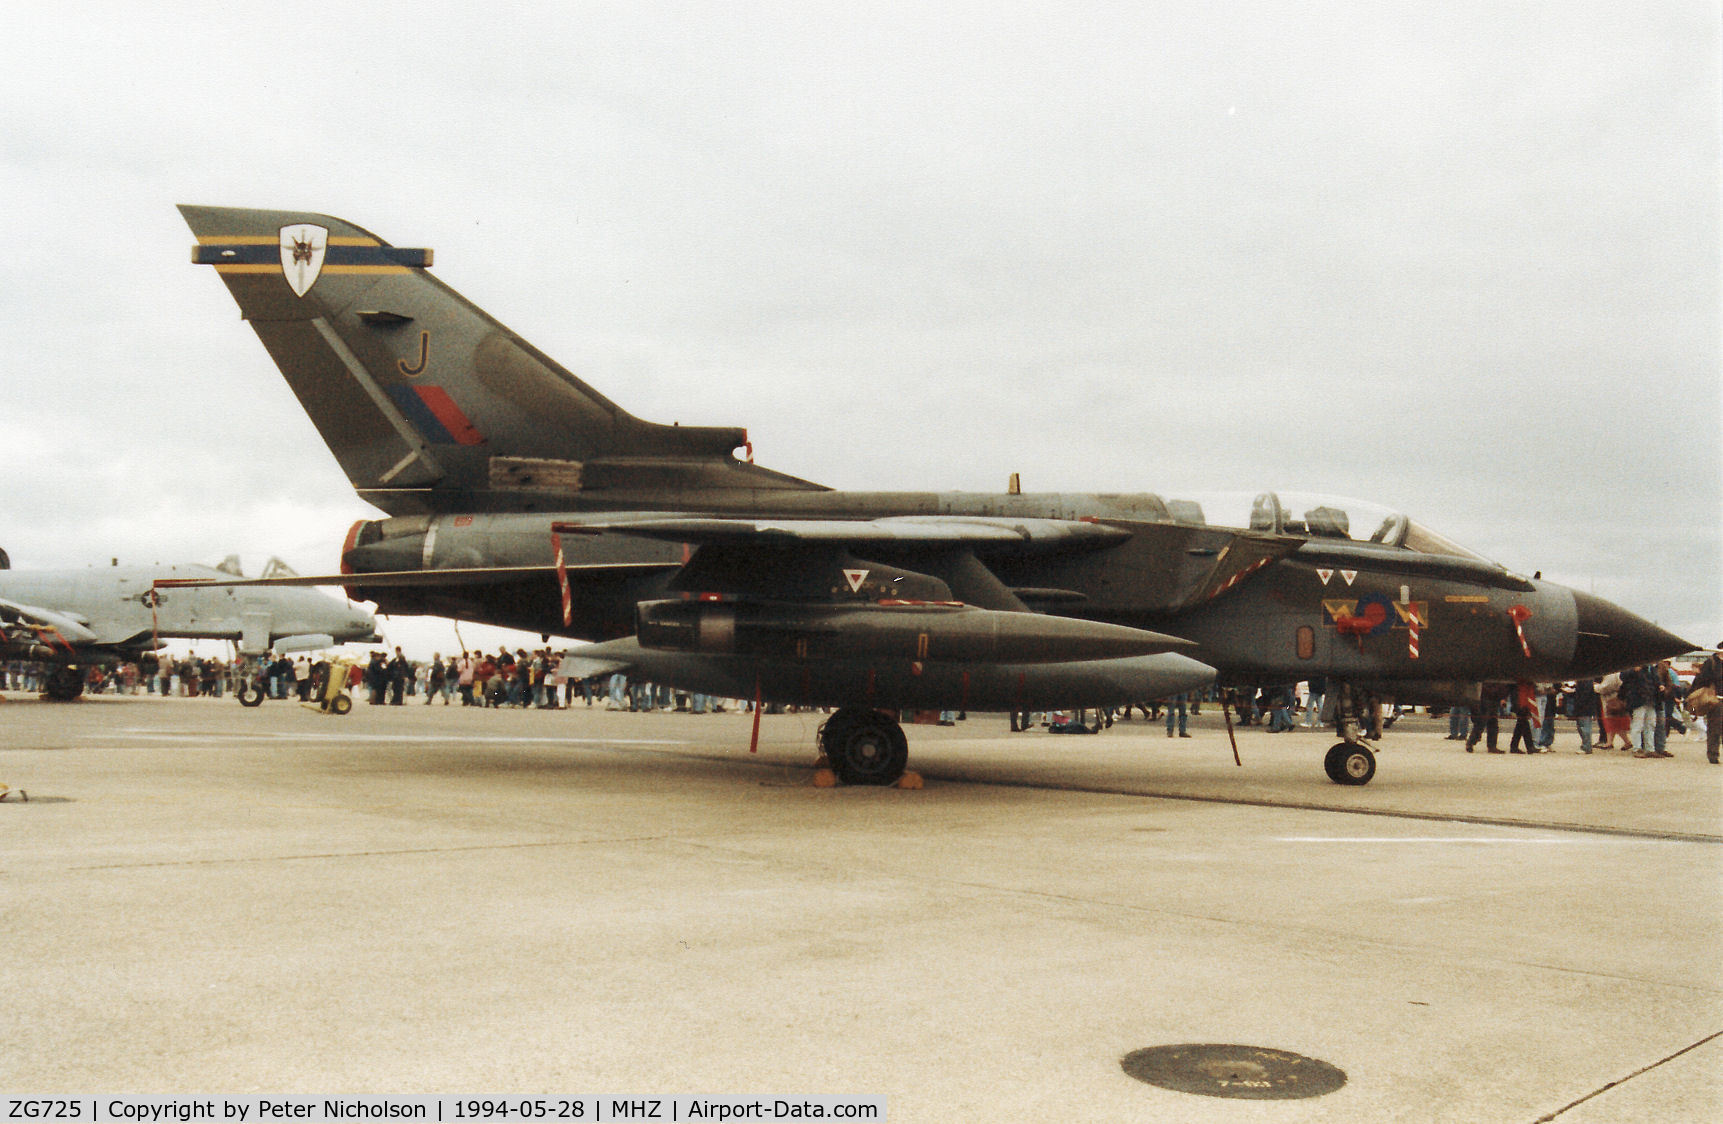 ZG725, 1990 Panavia Tornado GR.1A C/N 828/BS182/3399, Tornado GR.1A of 13 Squadron at RAF Marham on display at the 1994 RAF Mildenhall Air Fete.  Sadly, this aircraft was lost four months later when it crashed near Cape Frasca, Sardinia.